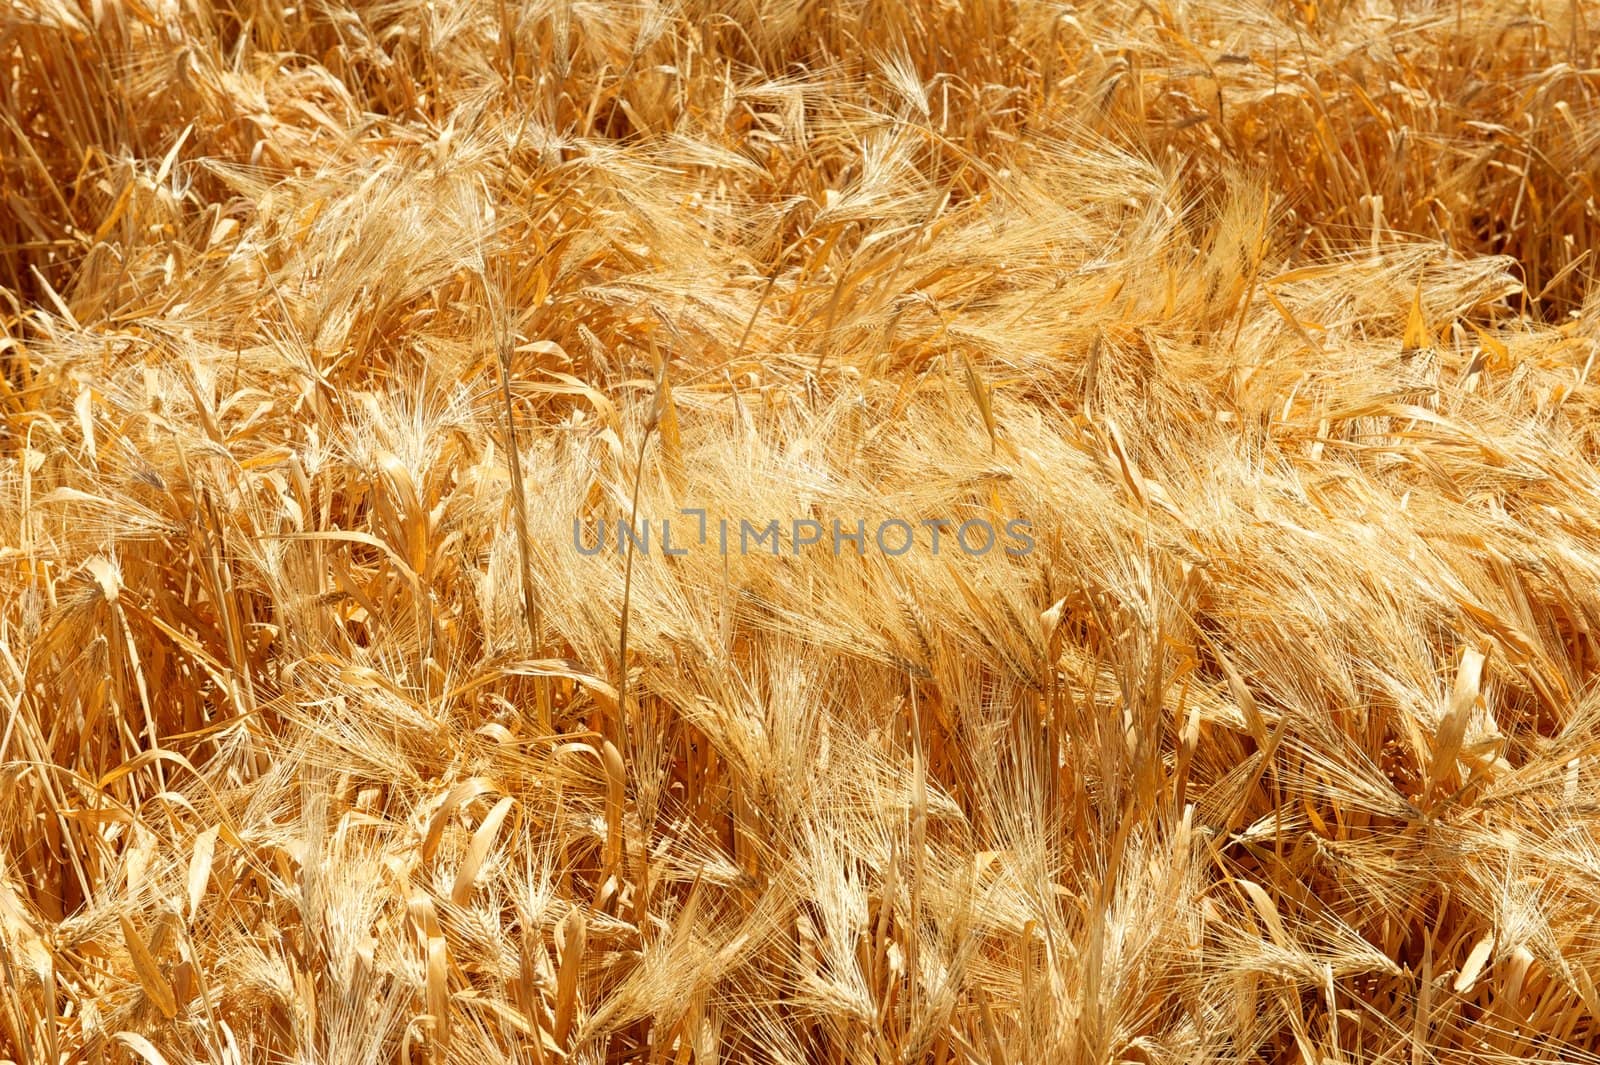 A shot of swirling stalks of wheat